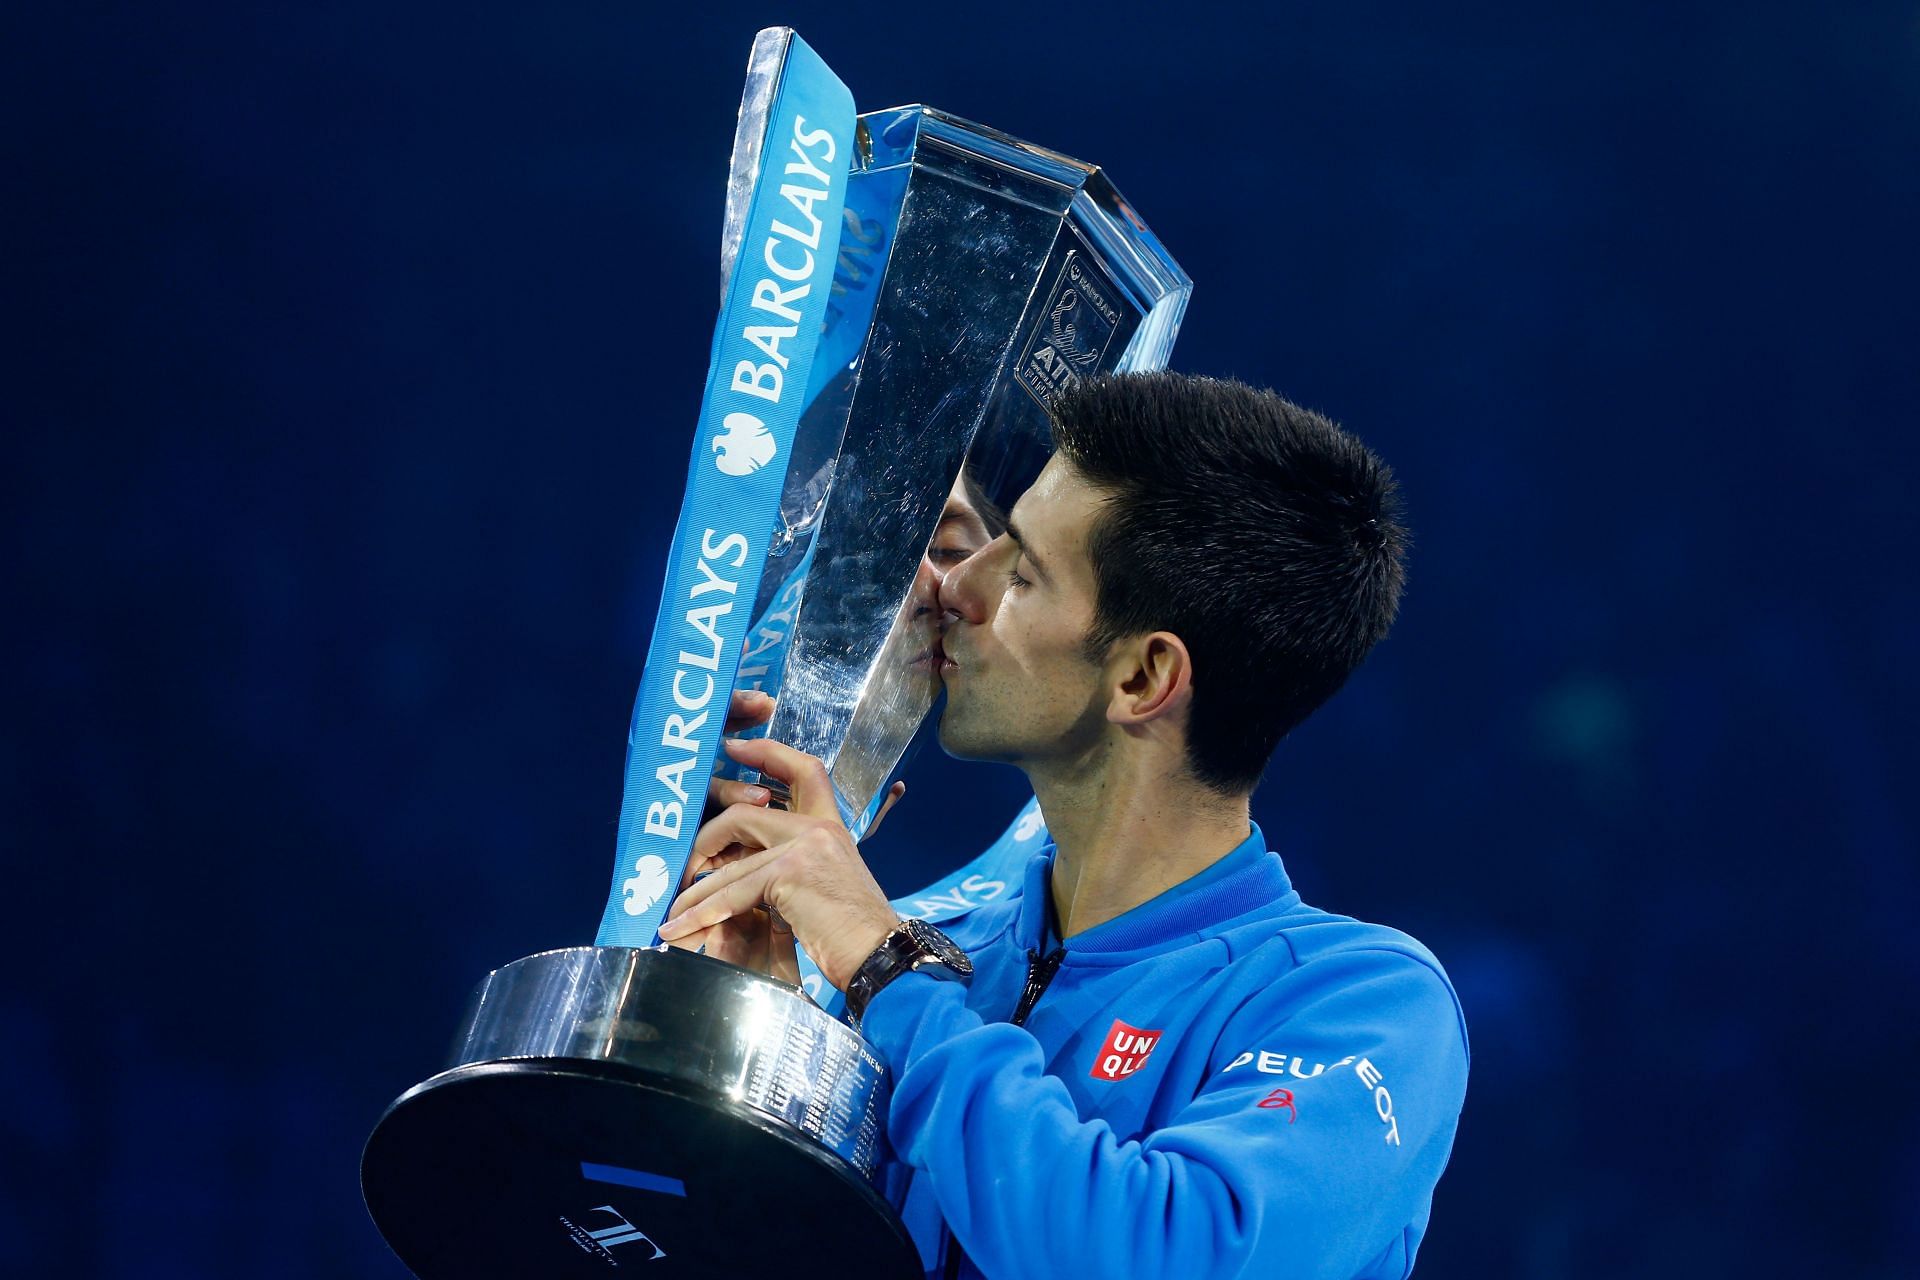 Djokovic wins the Barclays ATP World Tour Finals in 2015